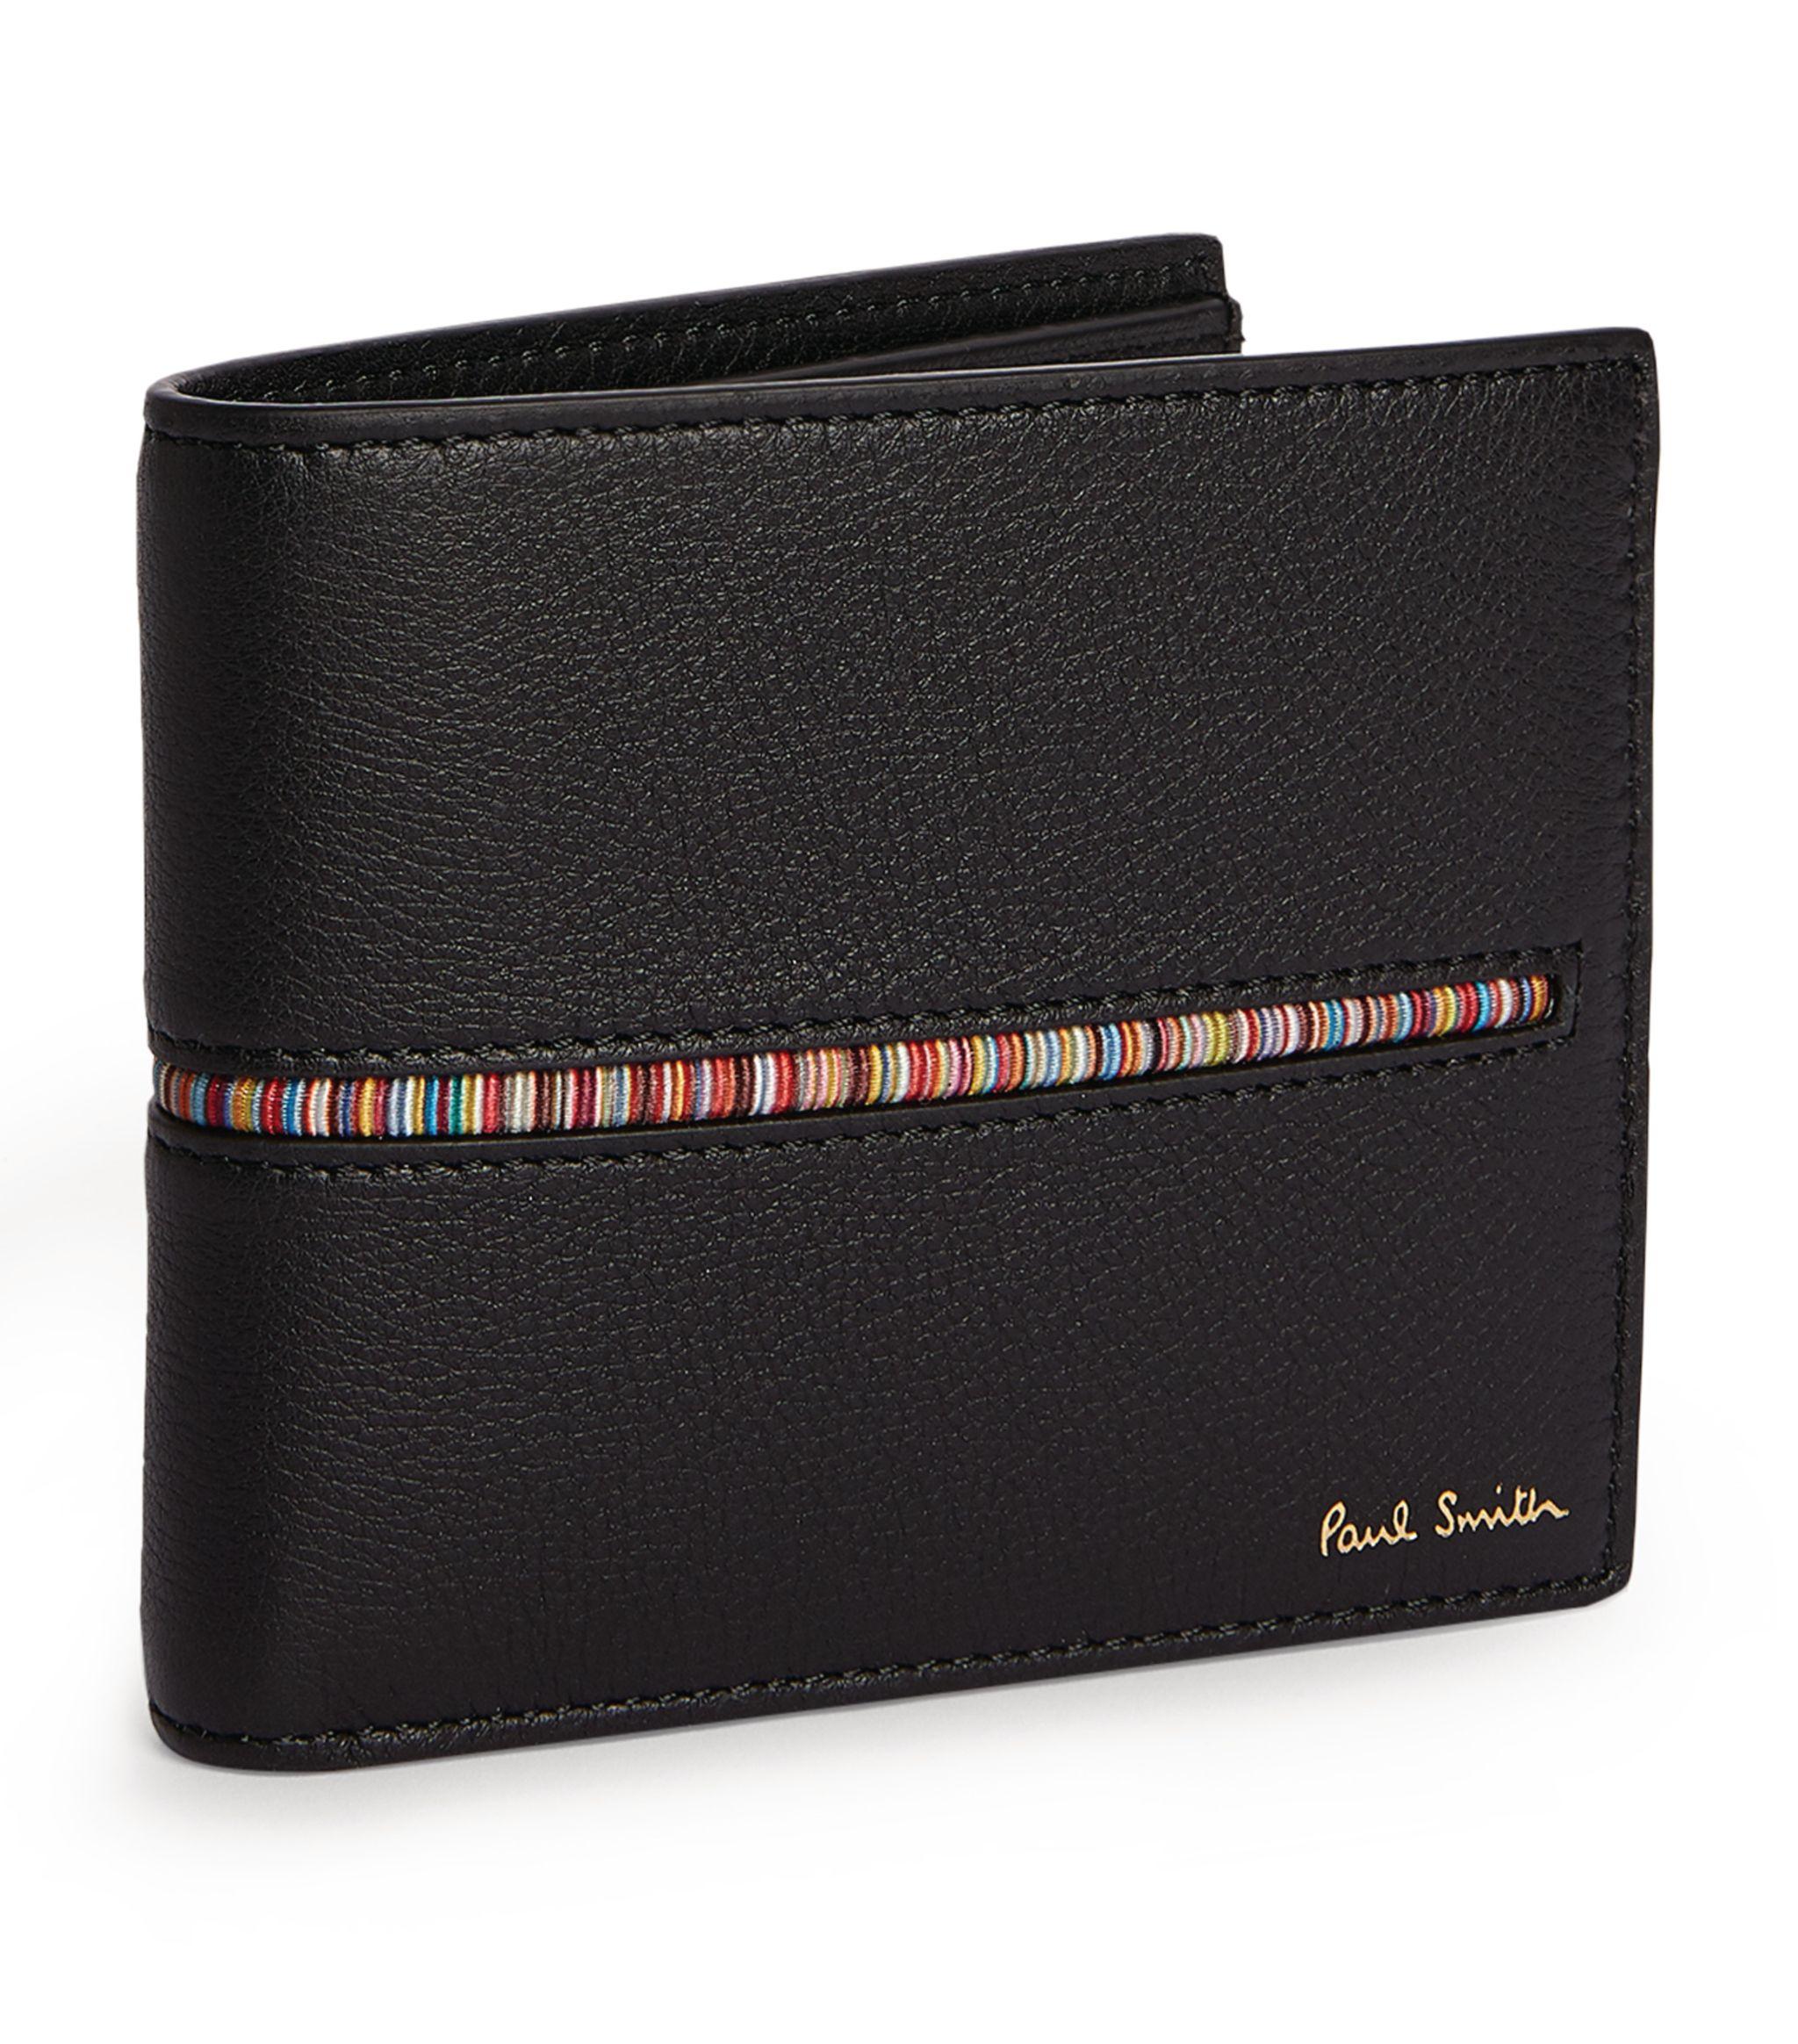 Paul Smith Signature Stripe Leather Bifold Wallet in Black for Men - Lyst